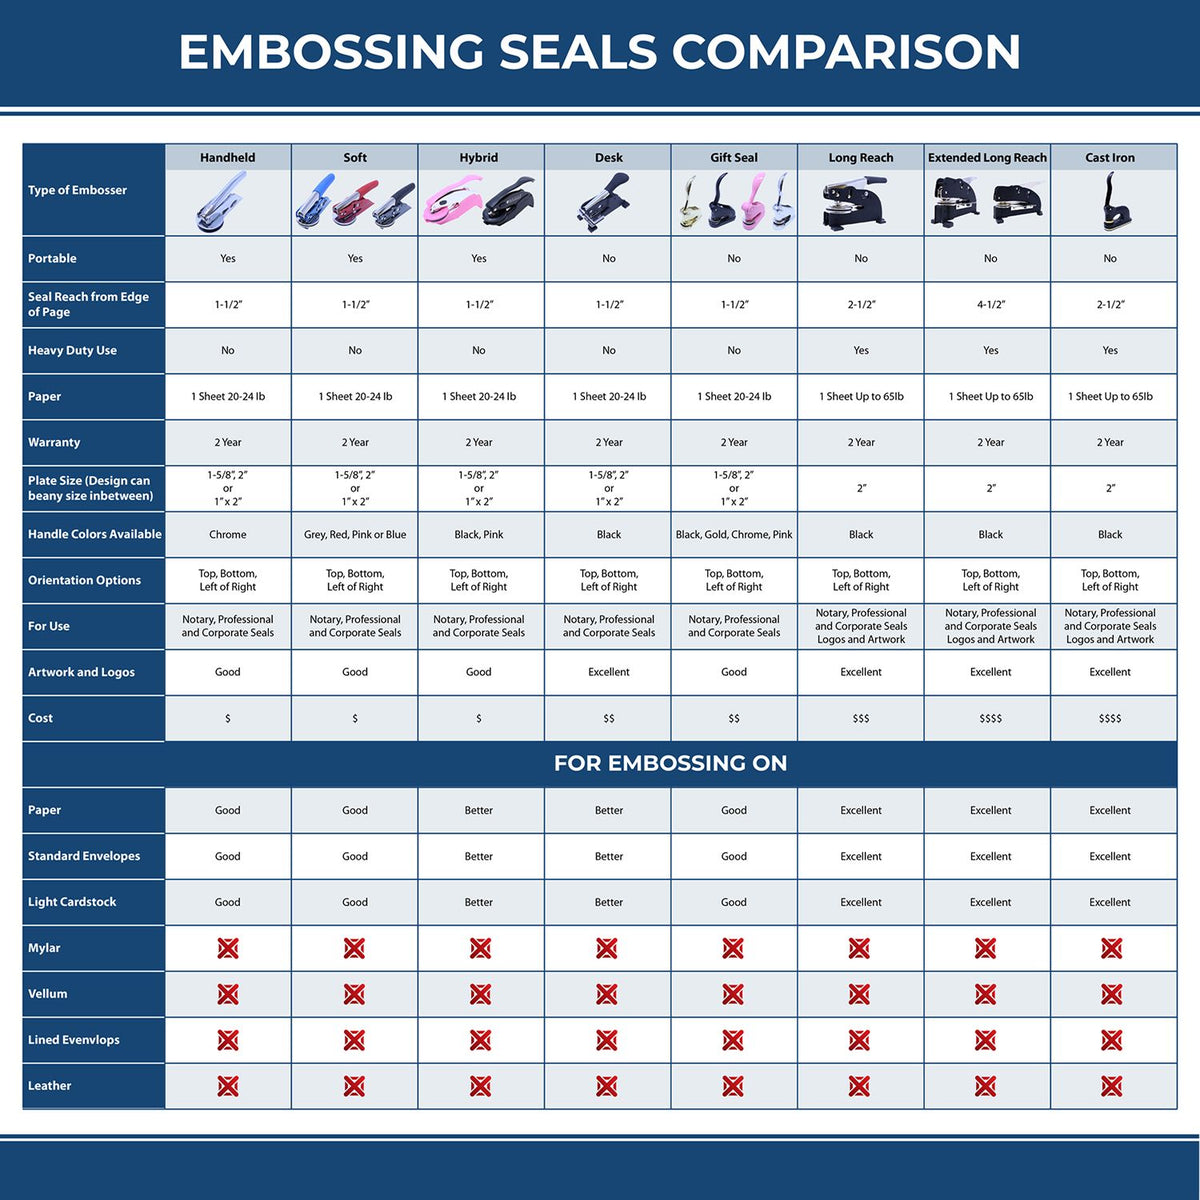 A comparison chart for the different types of mount models available for the Handheld Delaware Professional Geologist Embosser